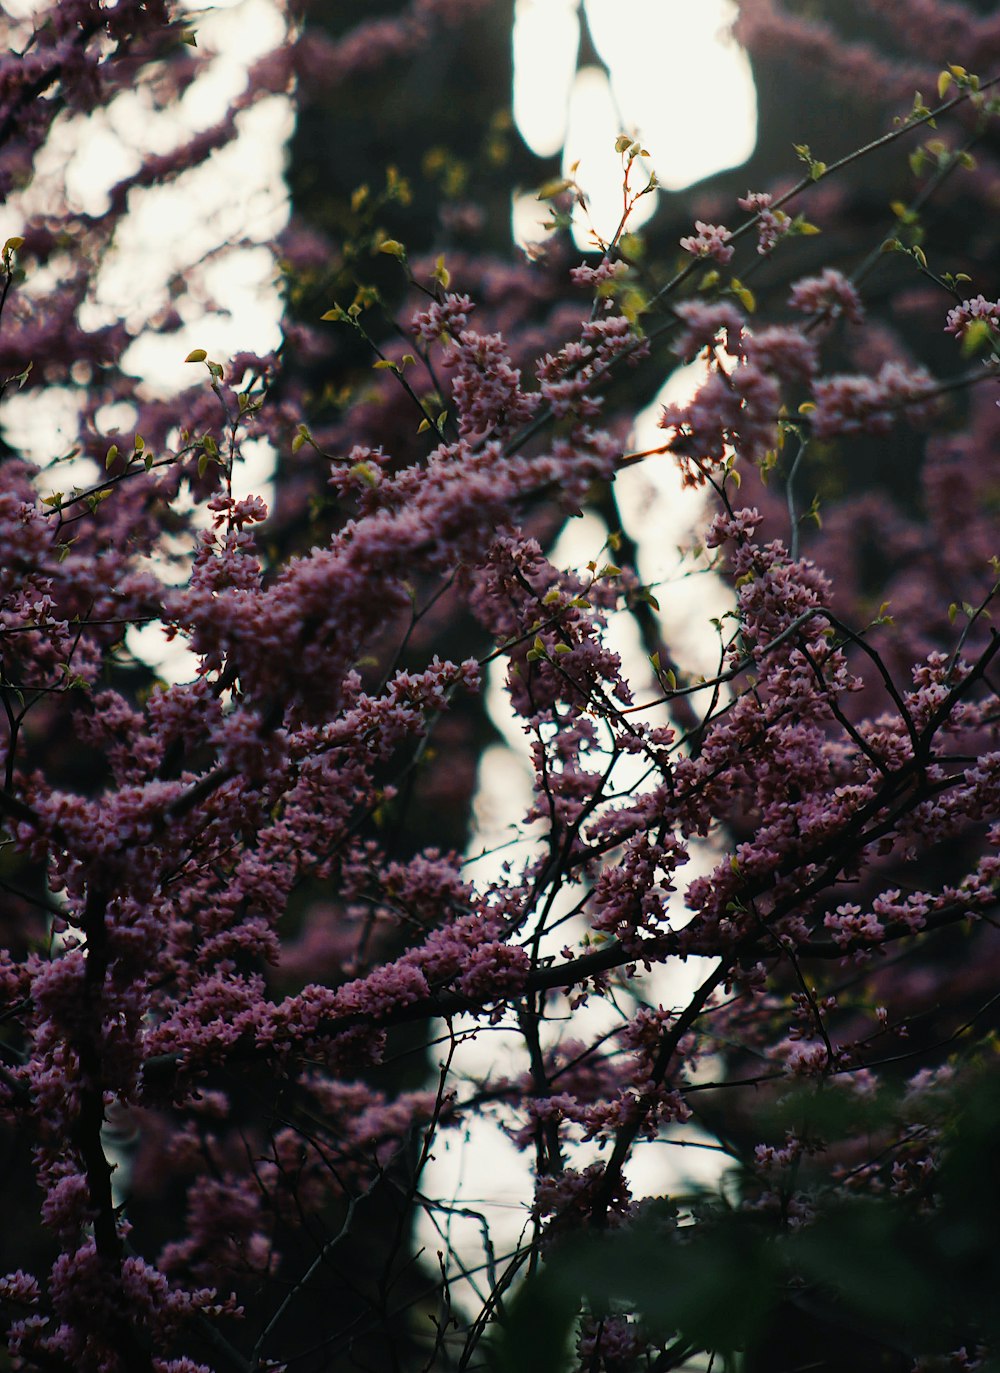 a tree filled with lots of purple flowers